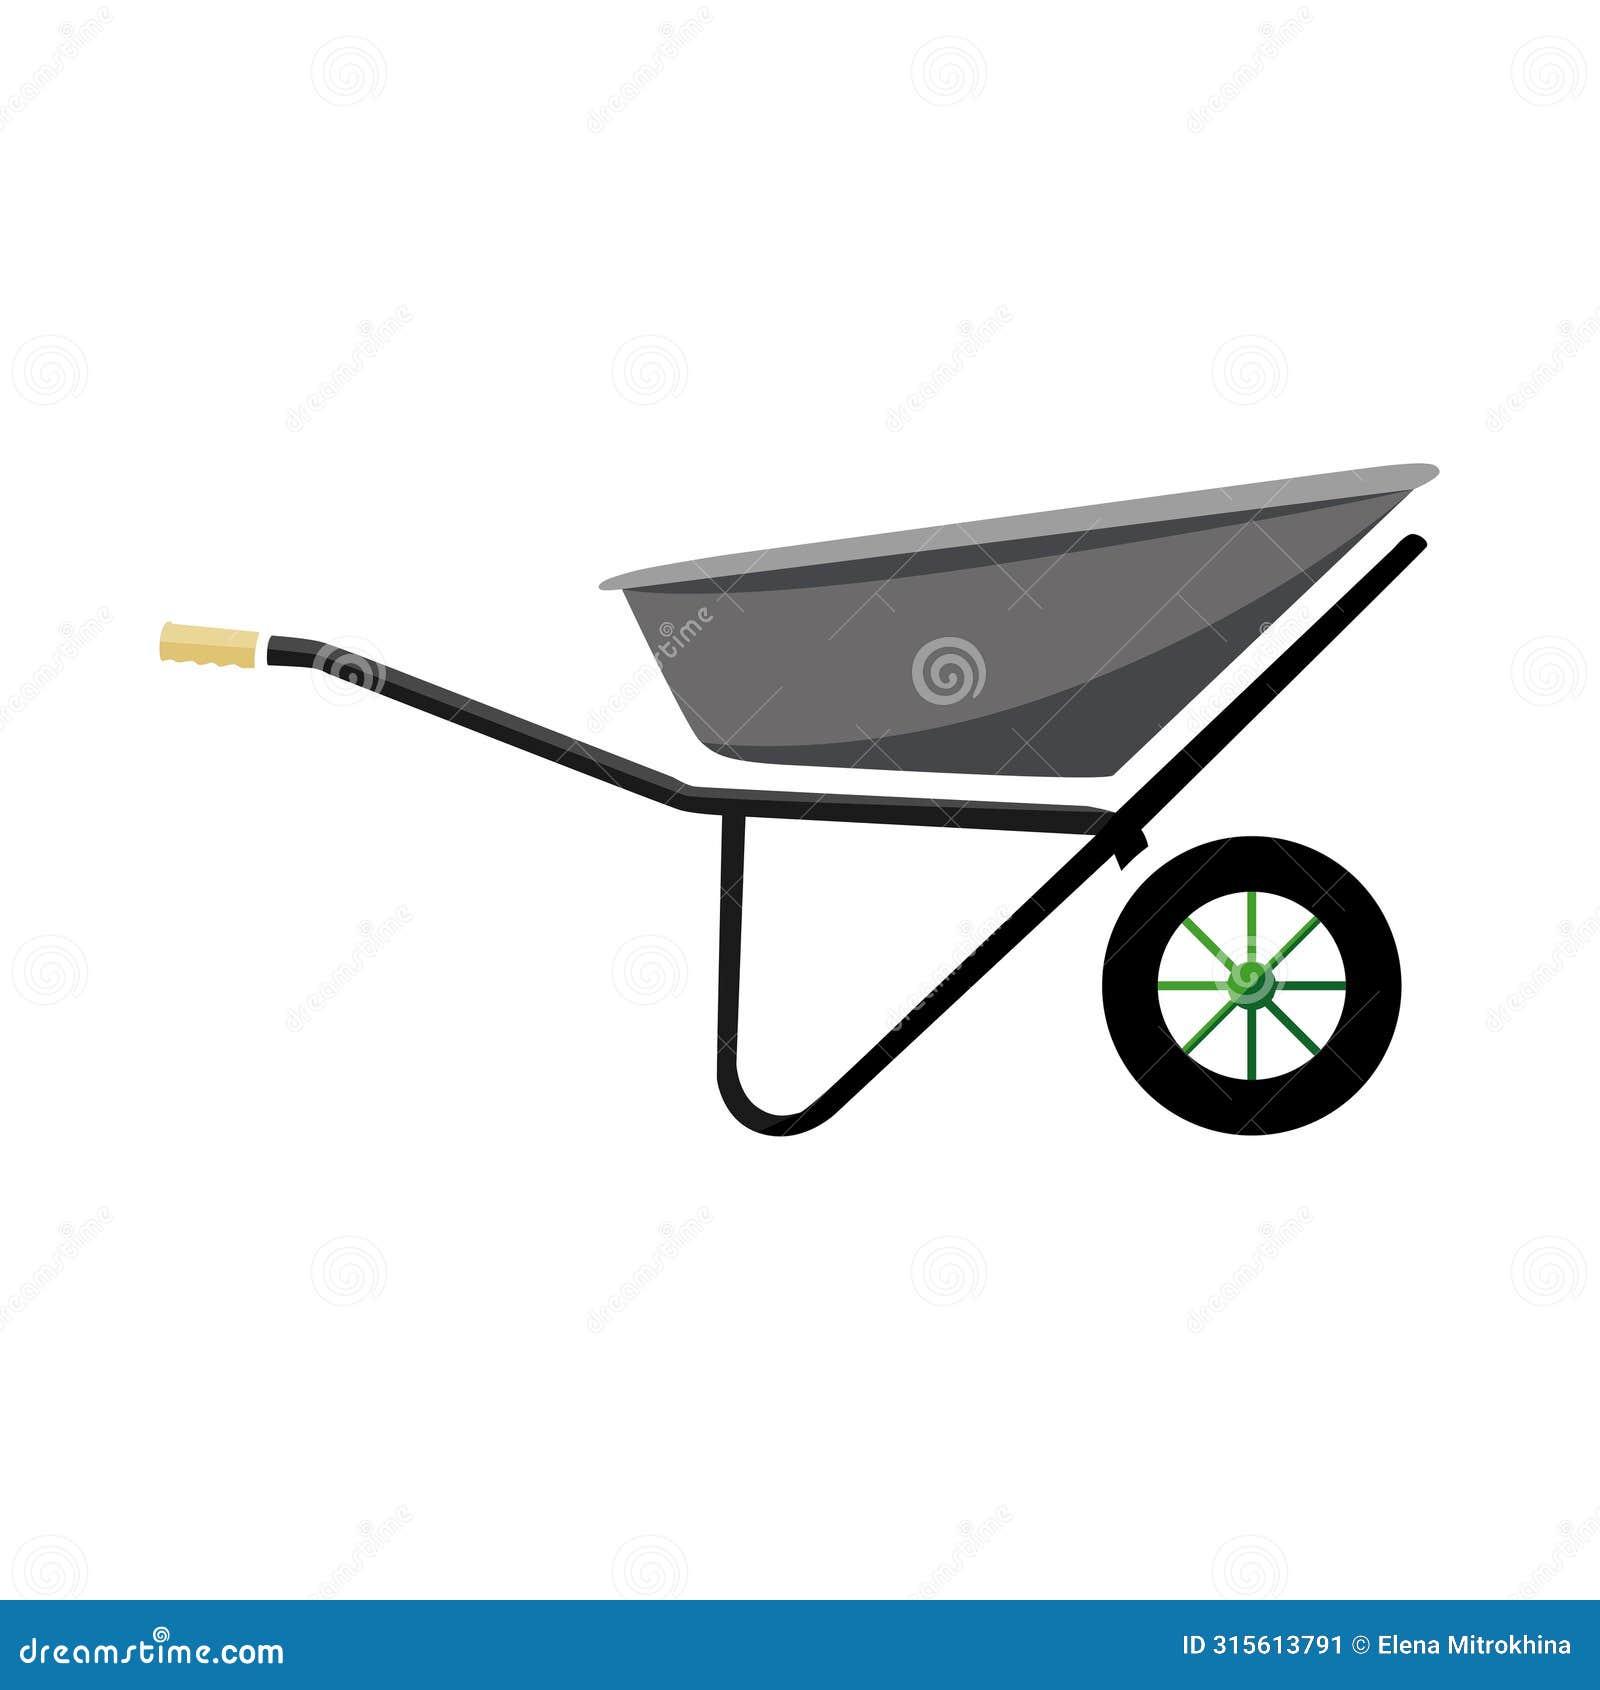 a garden and construction wheelbarrow. a convenient and maneuverable device for moving goods.